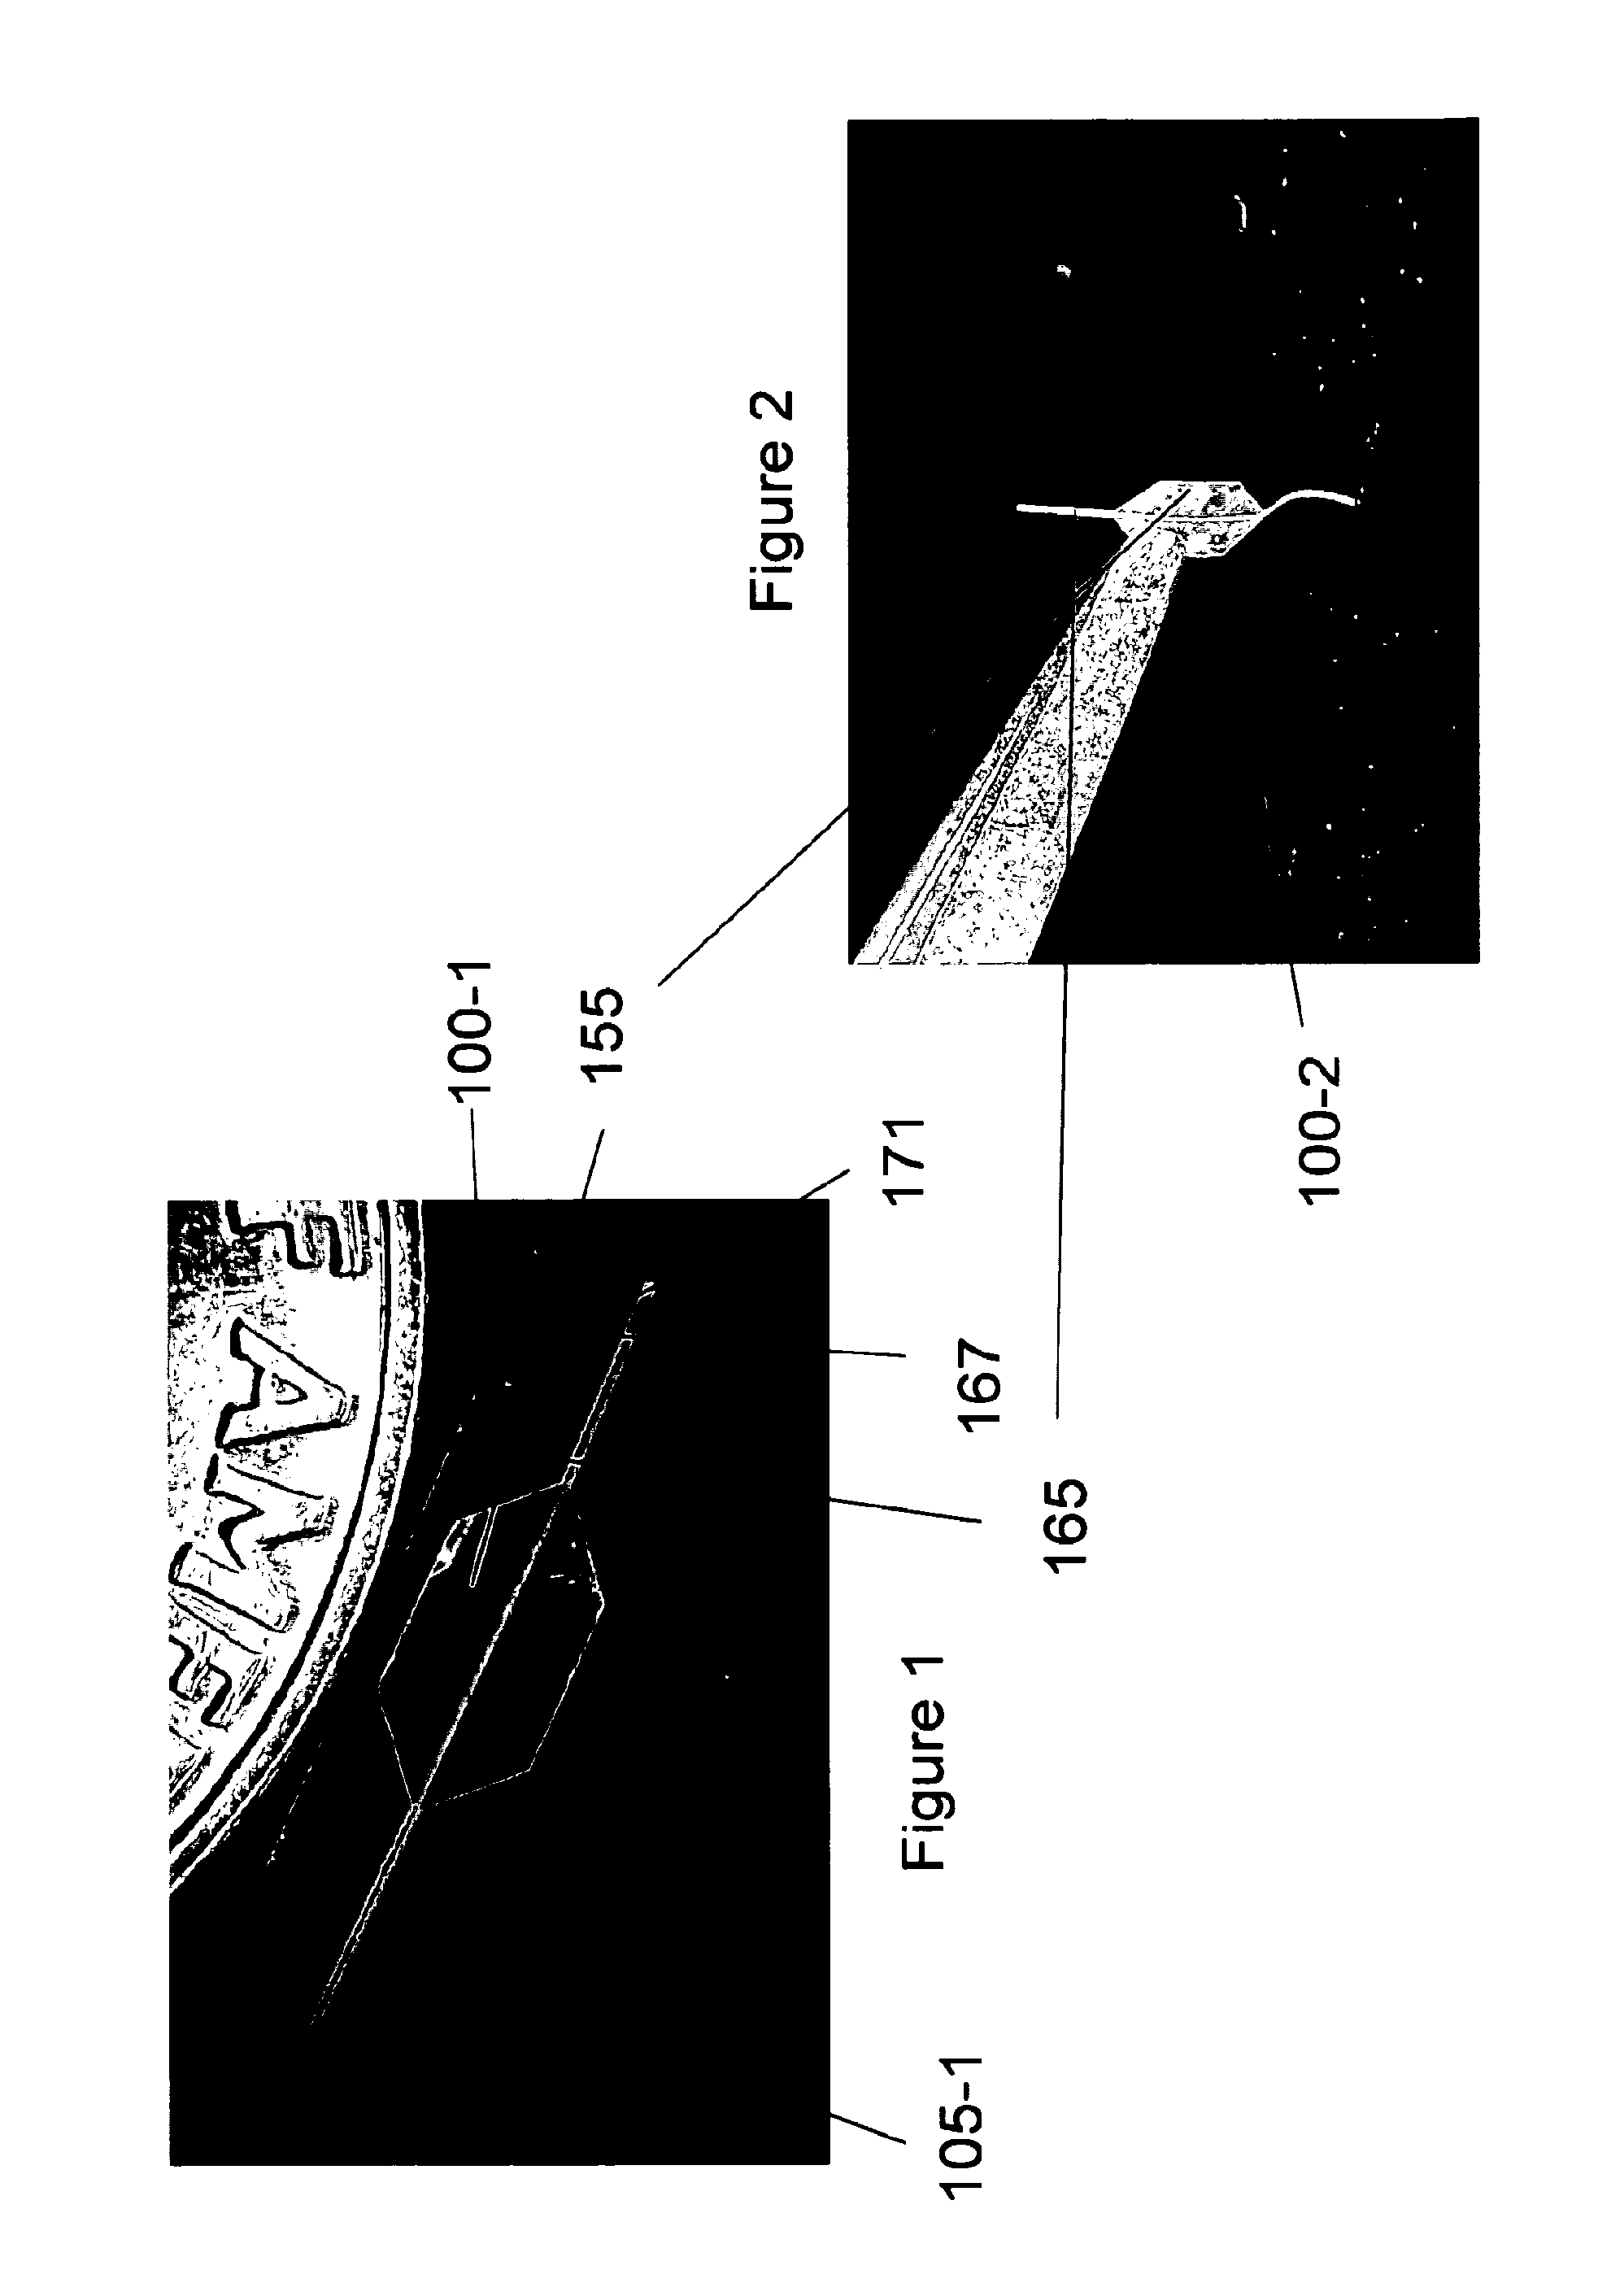 Convection enhanced delivery apparatus, method, and application